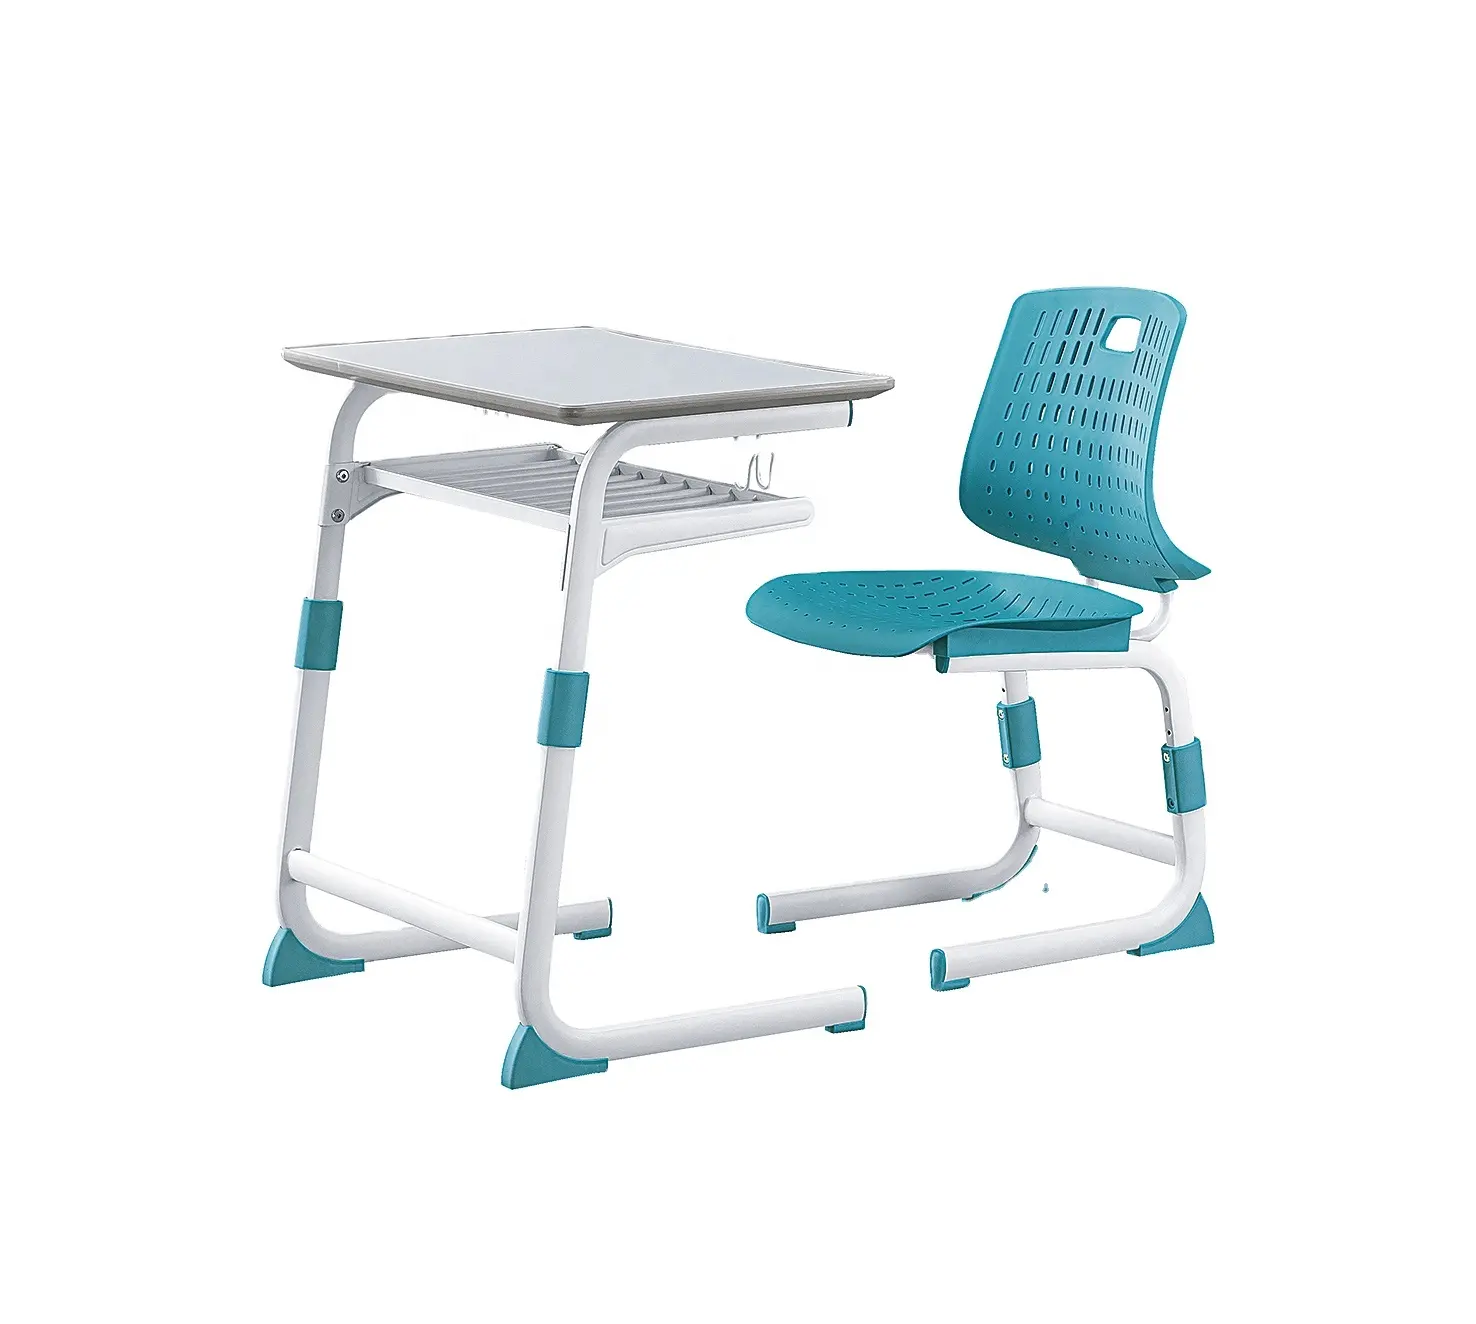 Adjustable Height Elementary School Study Table And Chairs Student Desk And Chair